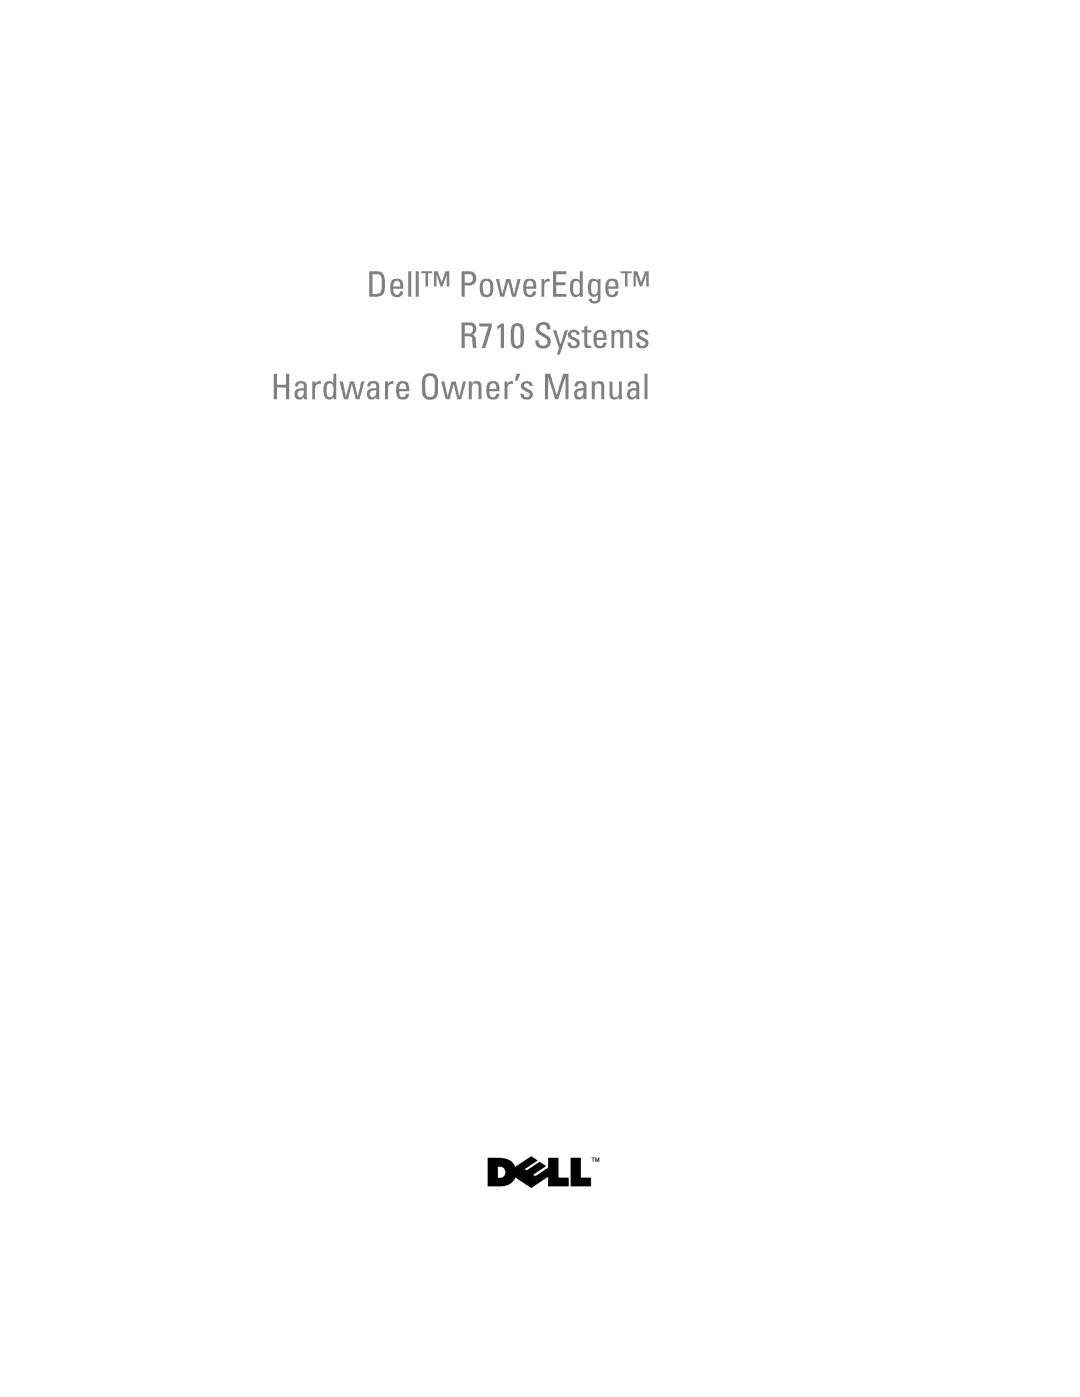 Dell owner manual Dell PowerEdge R710 Systems 